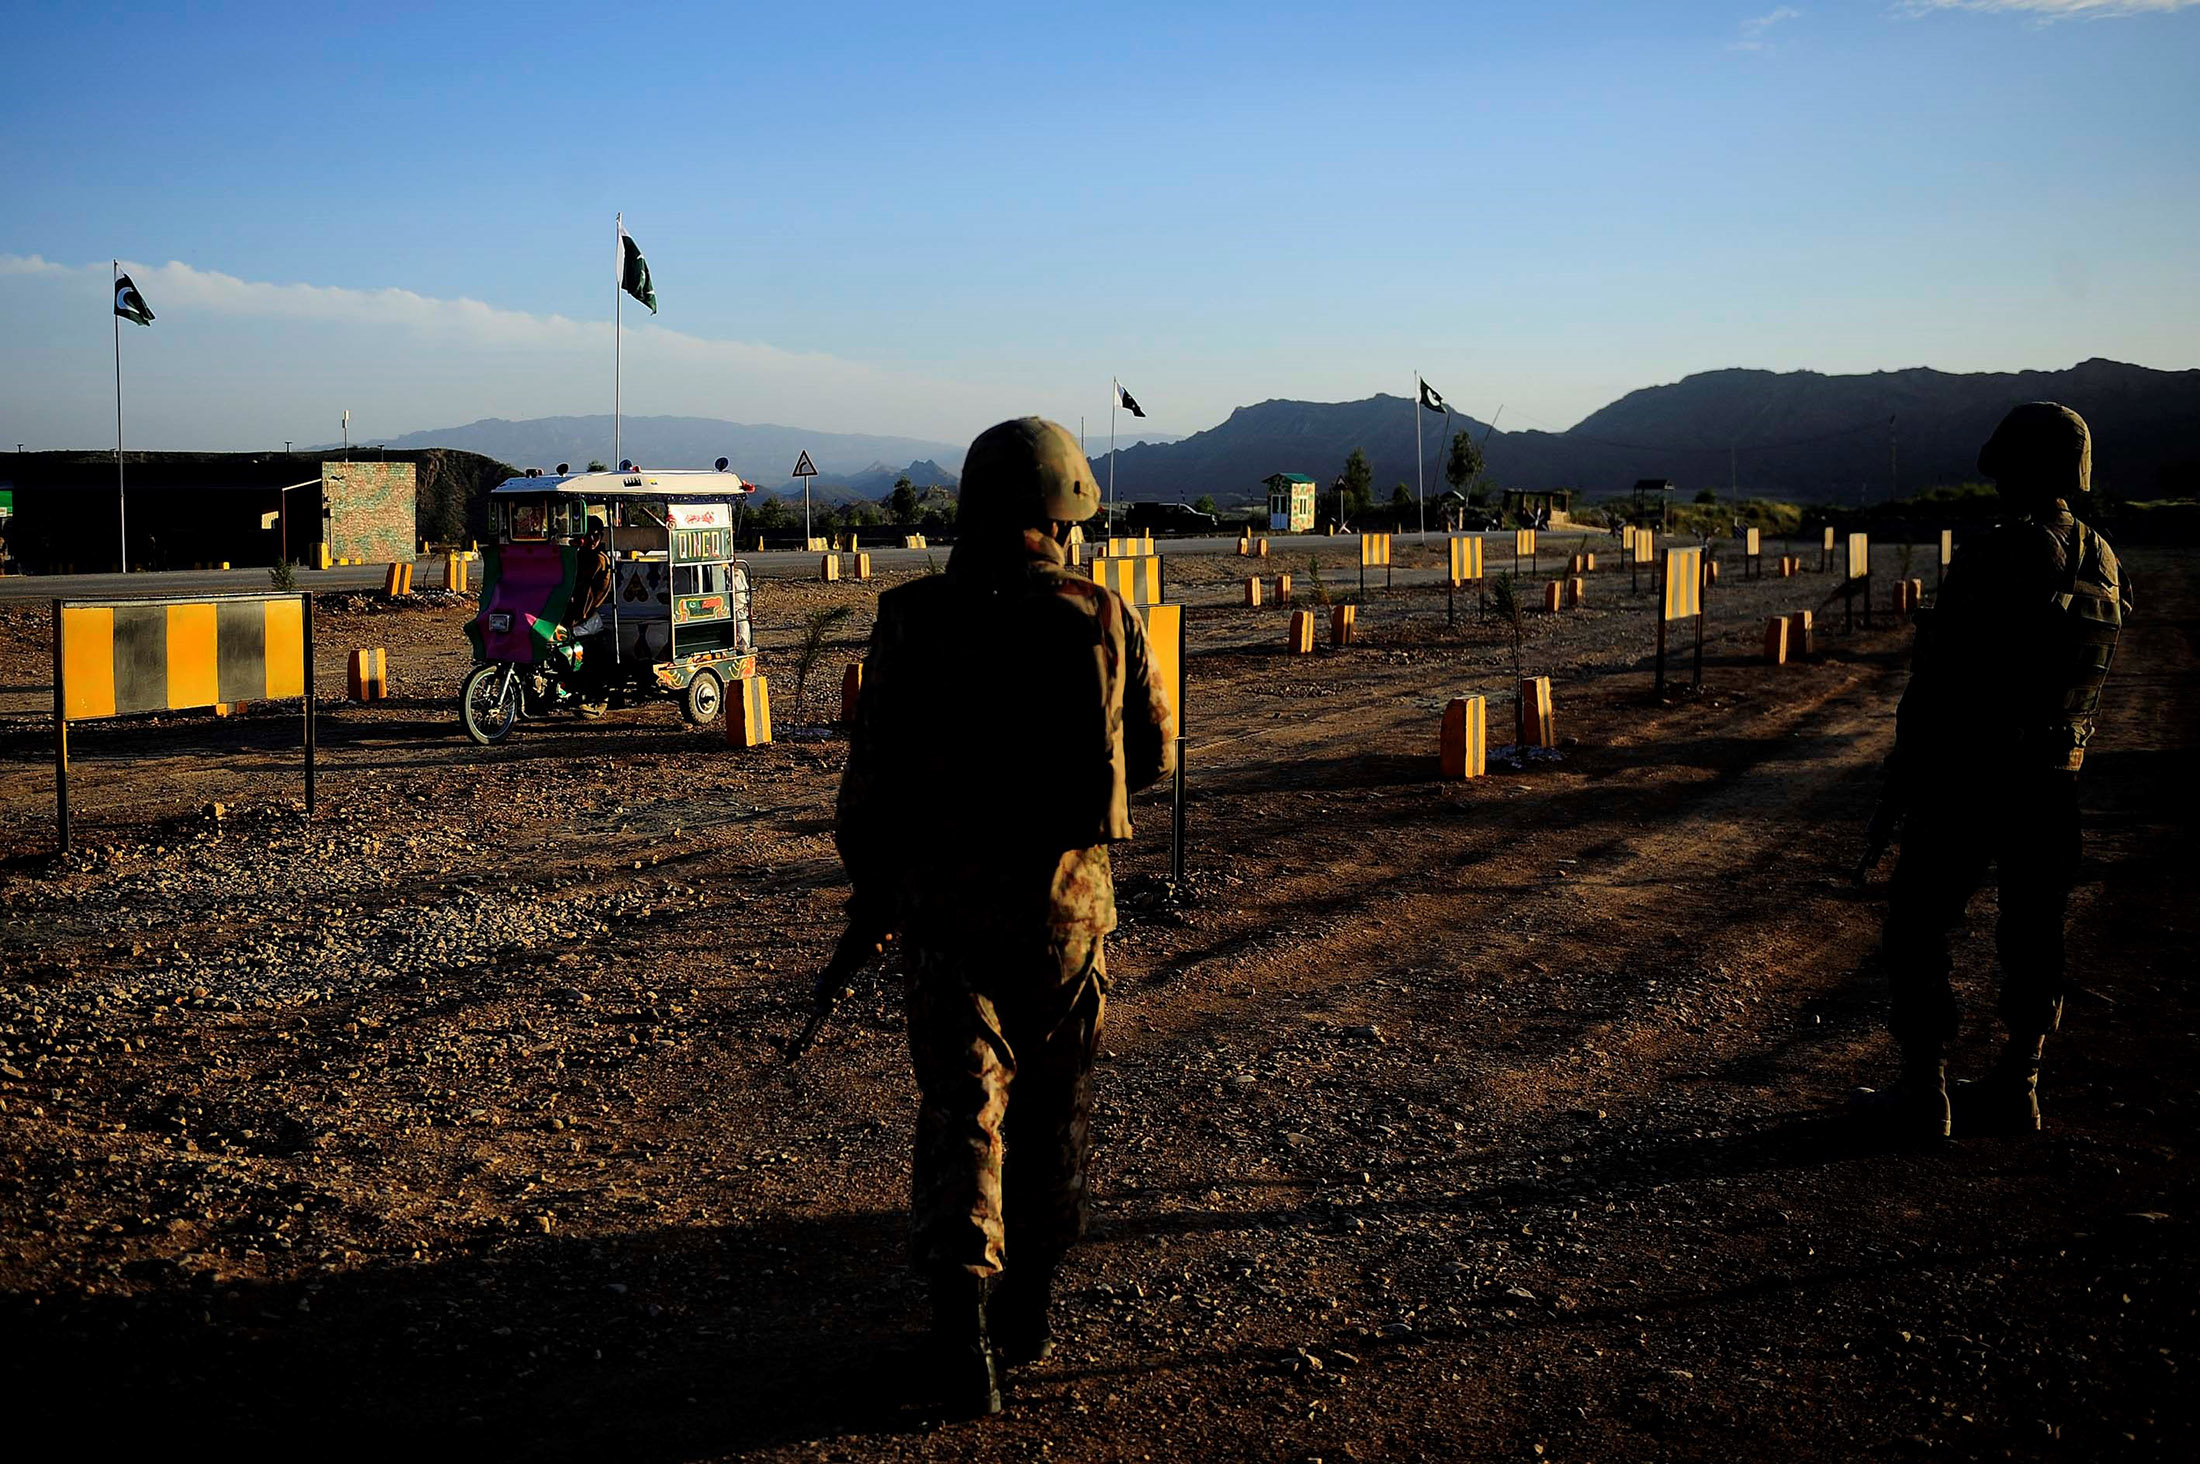 NORTH WAZIRISTAN, PAKISTAN - APRIL 20: Soldiers stand guard as a citizen passes through with his vehicle at the Saidgai military check point in the Afghanistan border of North Waziristan, Pakistan on April 20, 2016. Large-scale military operations against Taliban militants, have been launched since June 2014, have reached to the final stage. Over 3500 militants were neutralized during the operations and some of the civilians that had to leave homes because of operation, have started to return as all the entries and exits to area are controlled by this check point. North Waziristan - one of Pakistans seven semi-autonomous tribal regions - has seen numerous clashes between the army and Taliban since June of 2014 amid a full-scale military onslaught. The just-concluded military operation also served to displace some one million tribesmen from North Waziristan, nearly 30 percent of whom have since returned to their homes.
